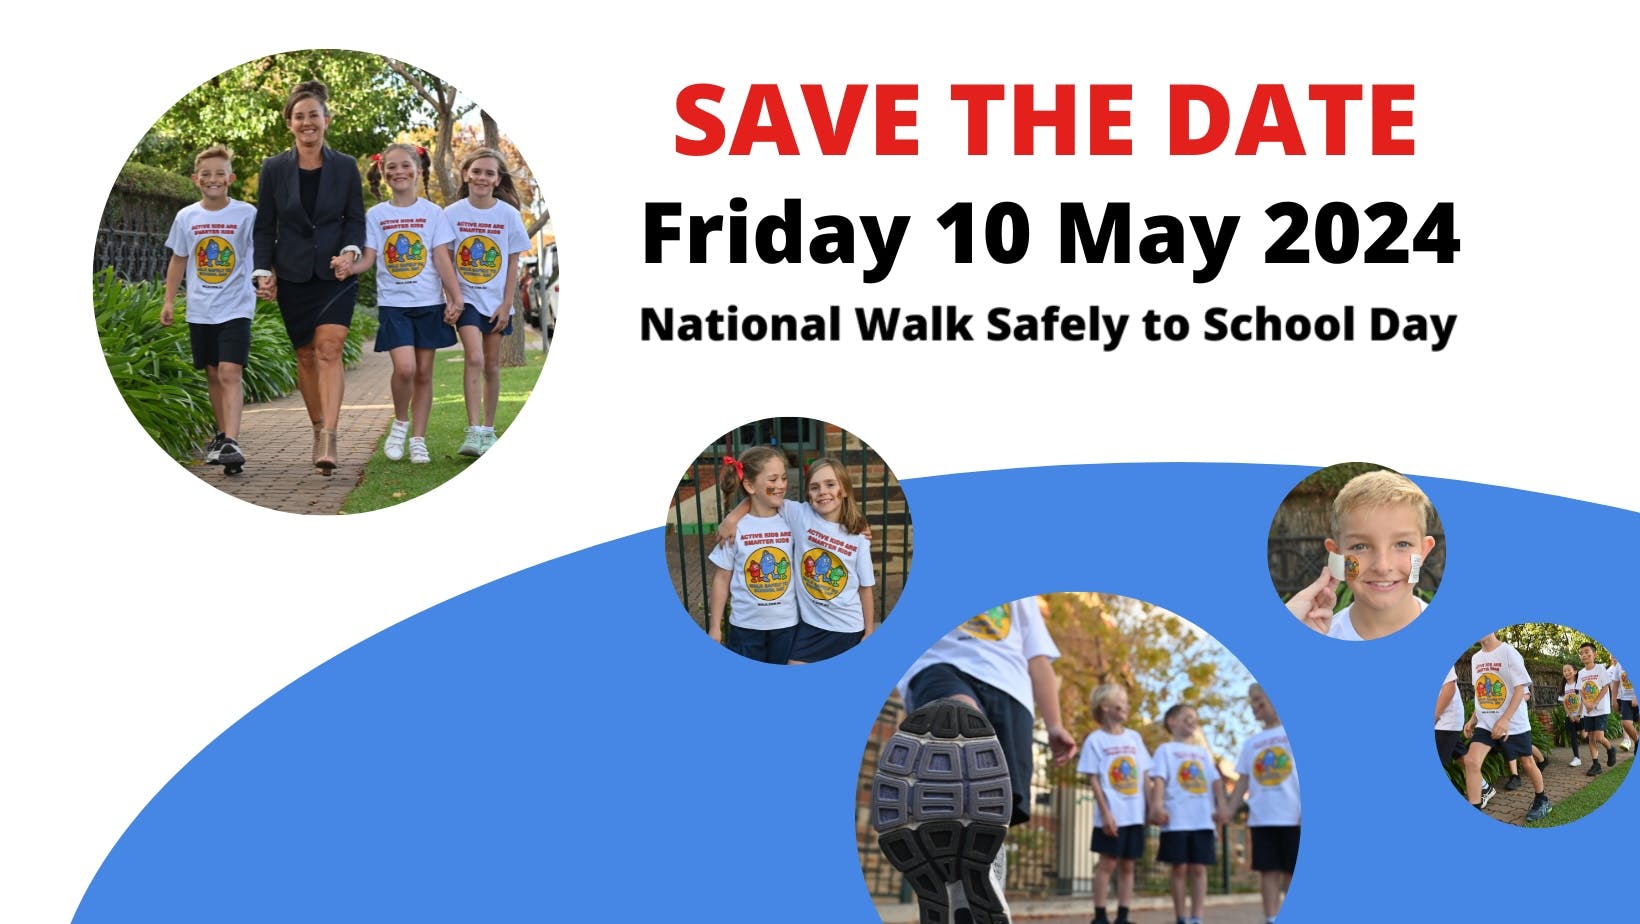 Walk safely to school day